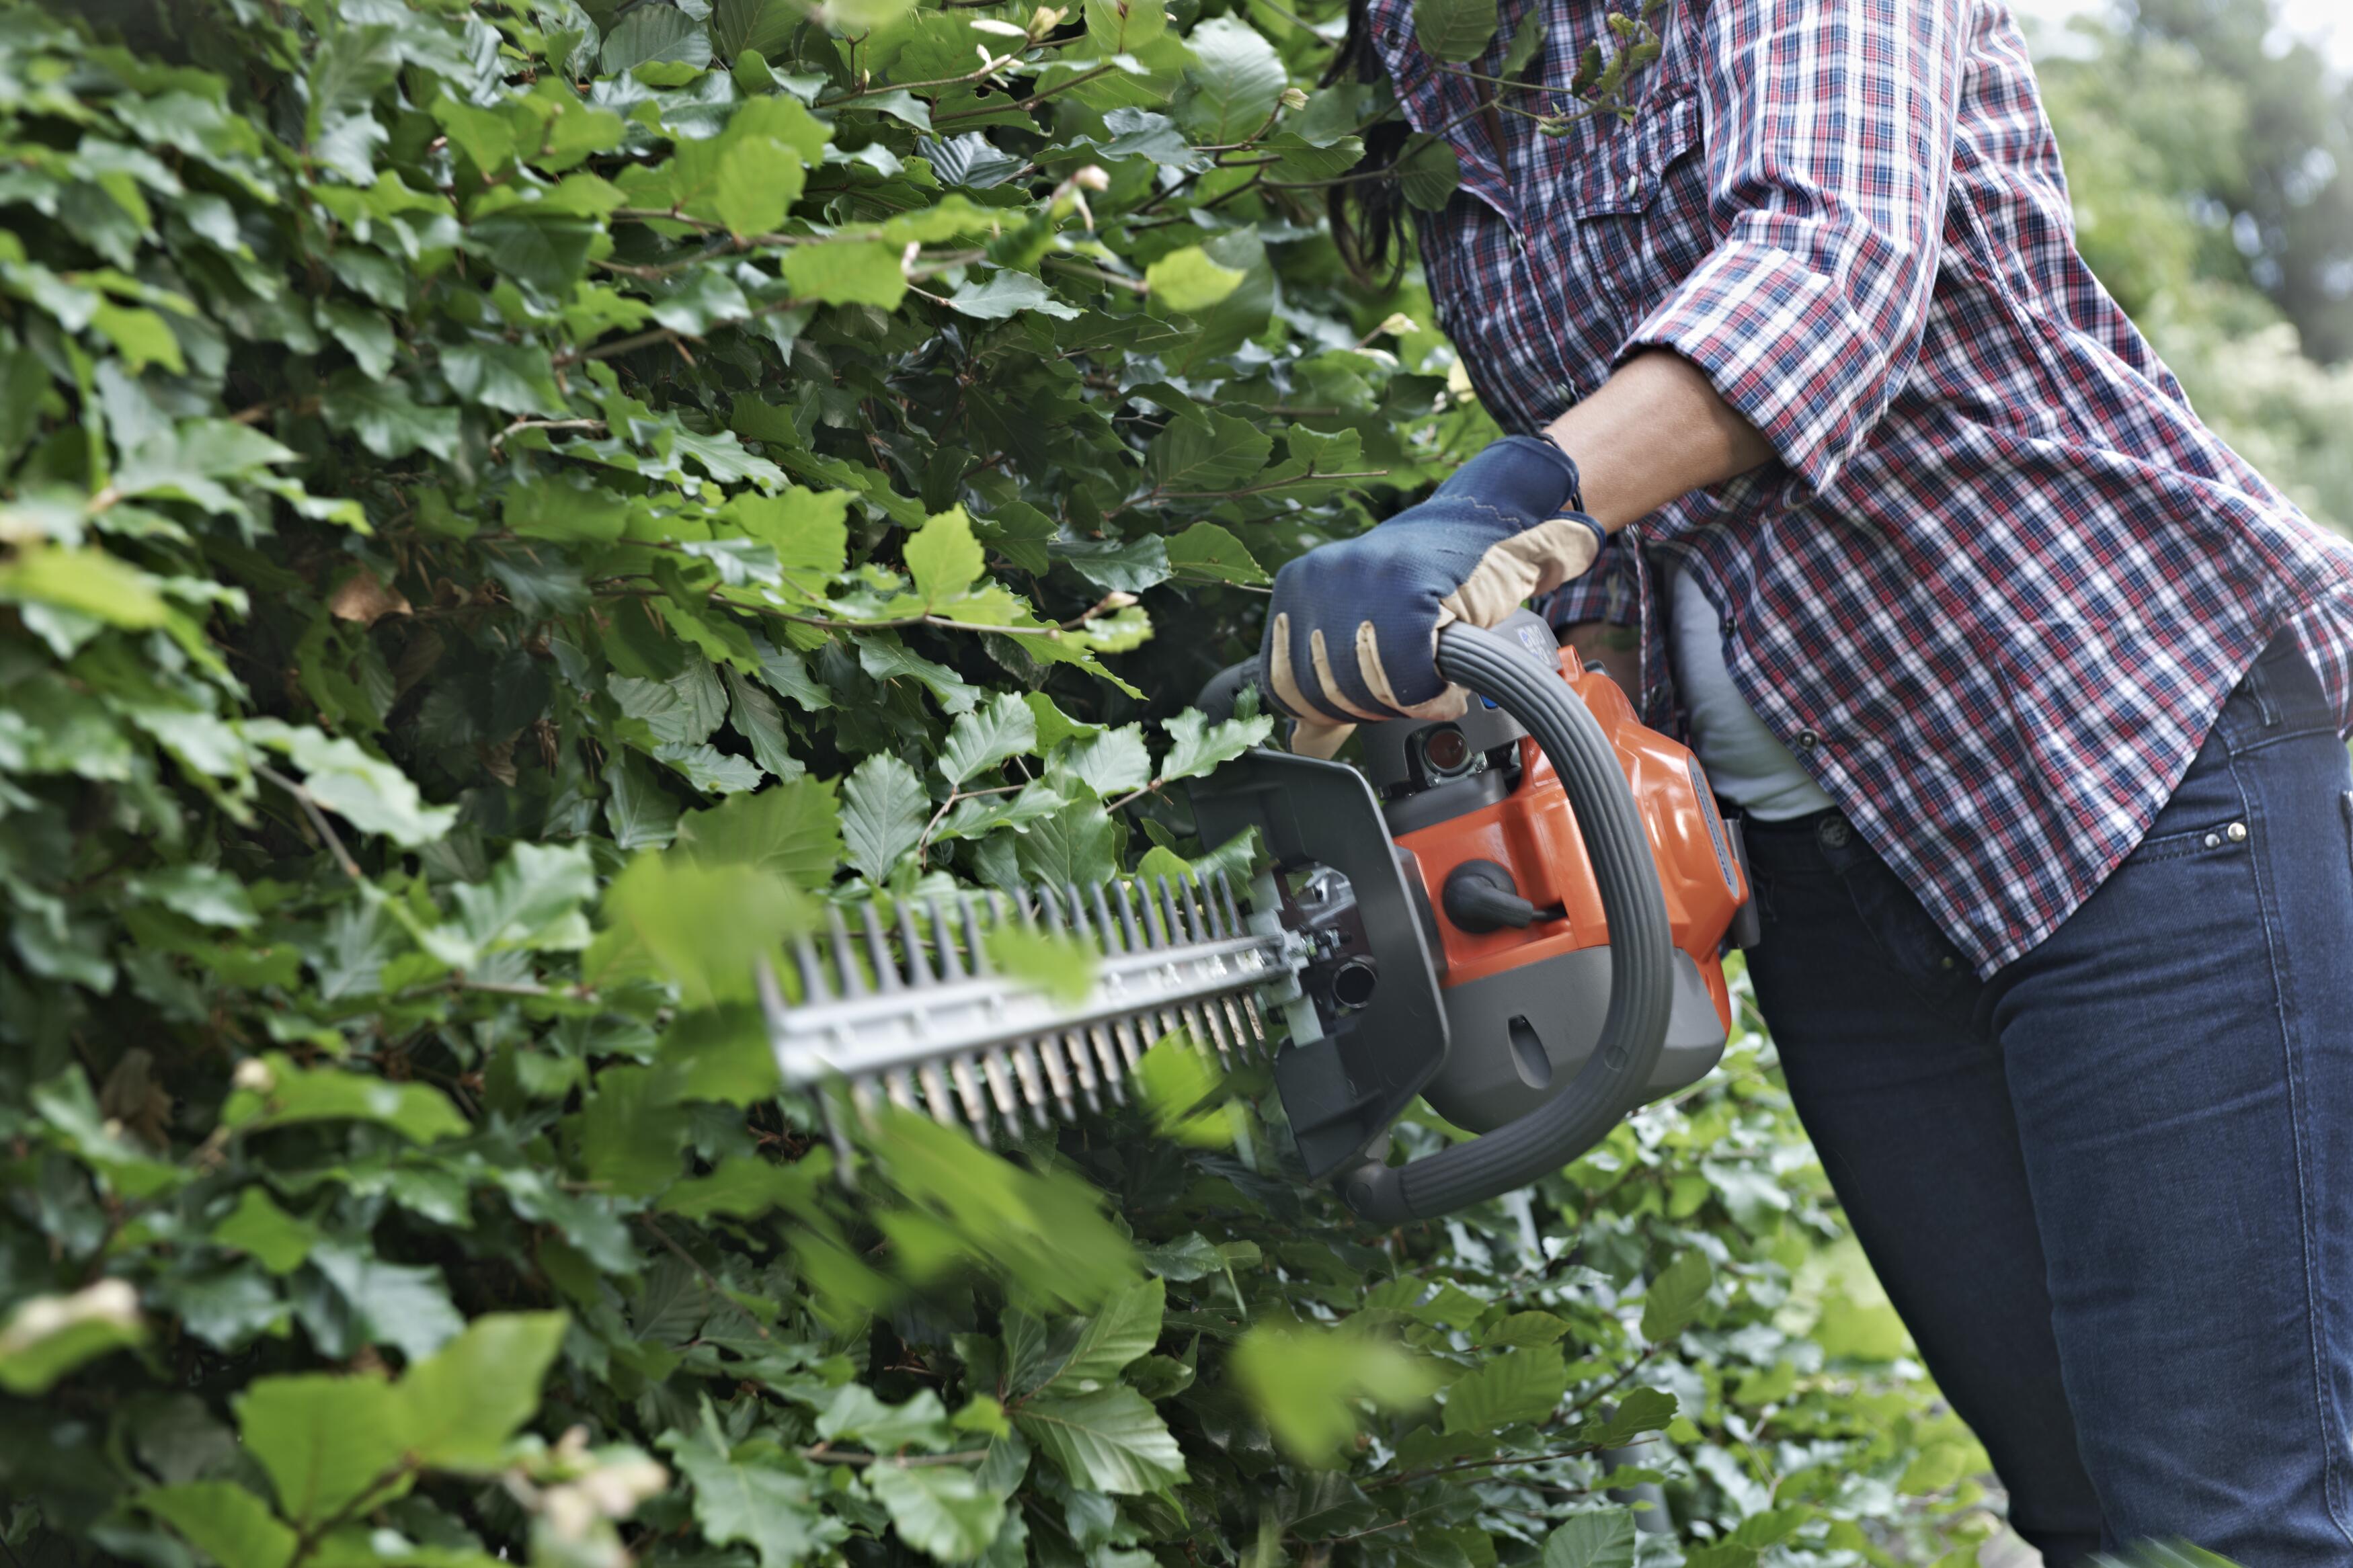 What to think about when buying a hedge trimmer